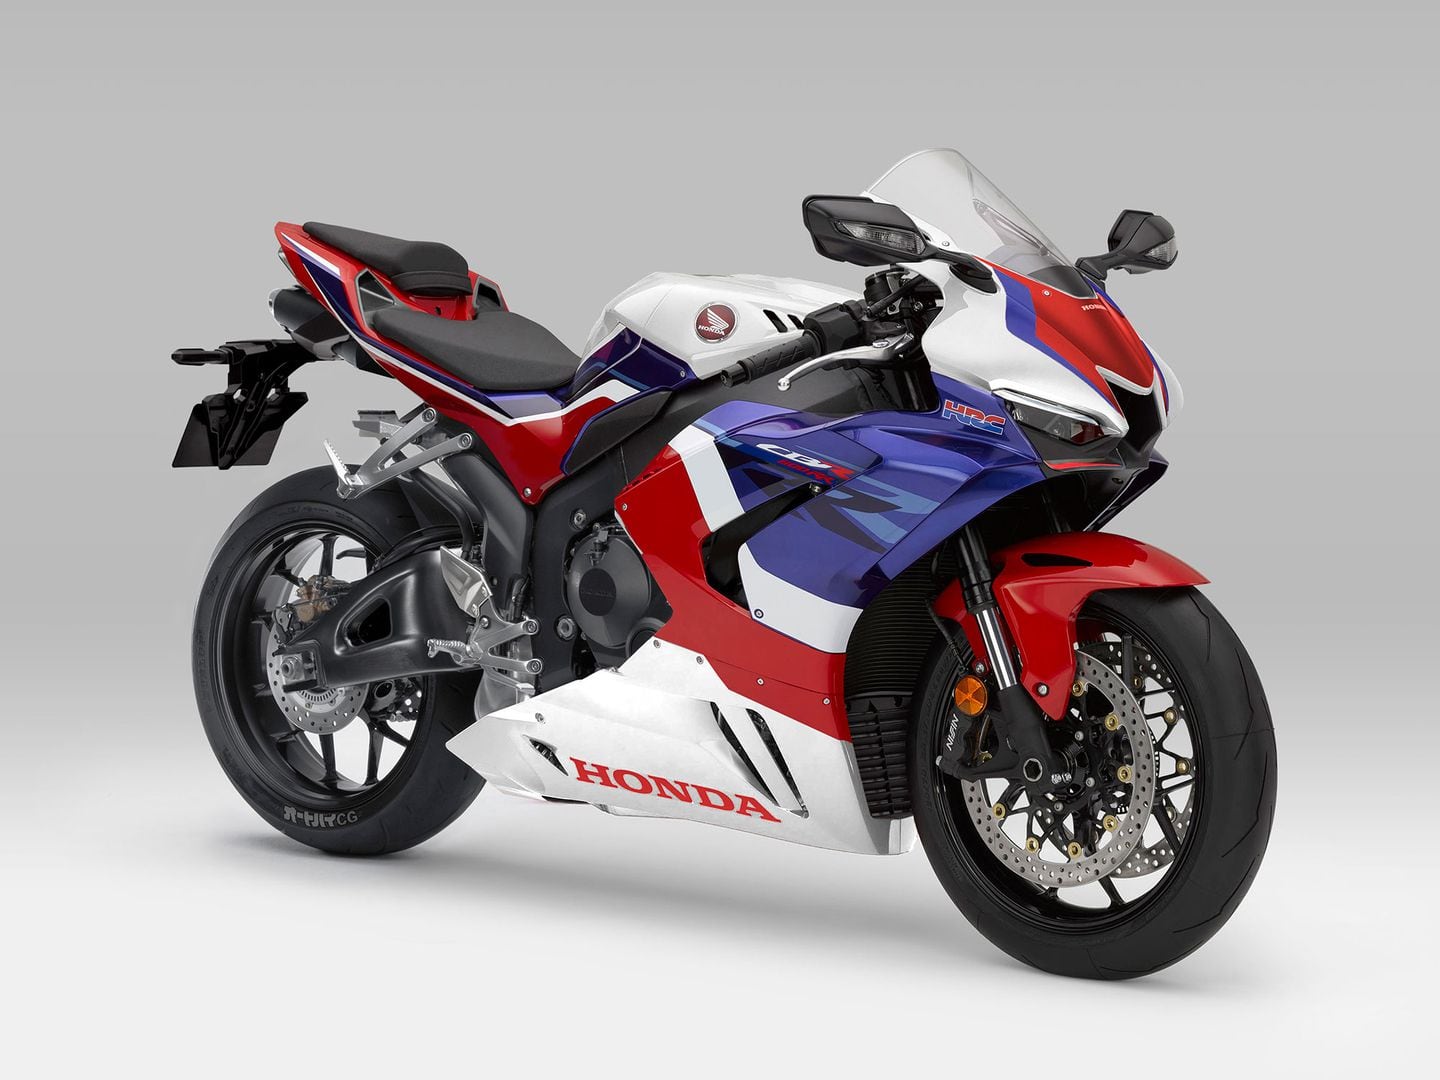 Honda CBR600RR Update For 2021 Cycle World